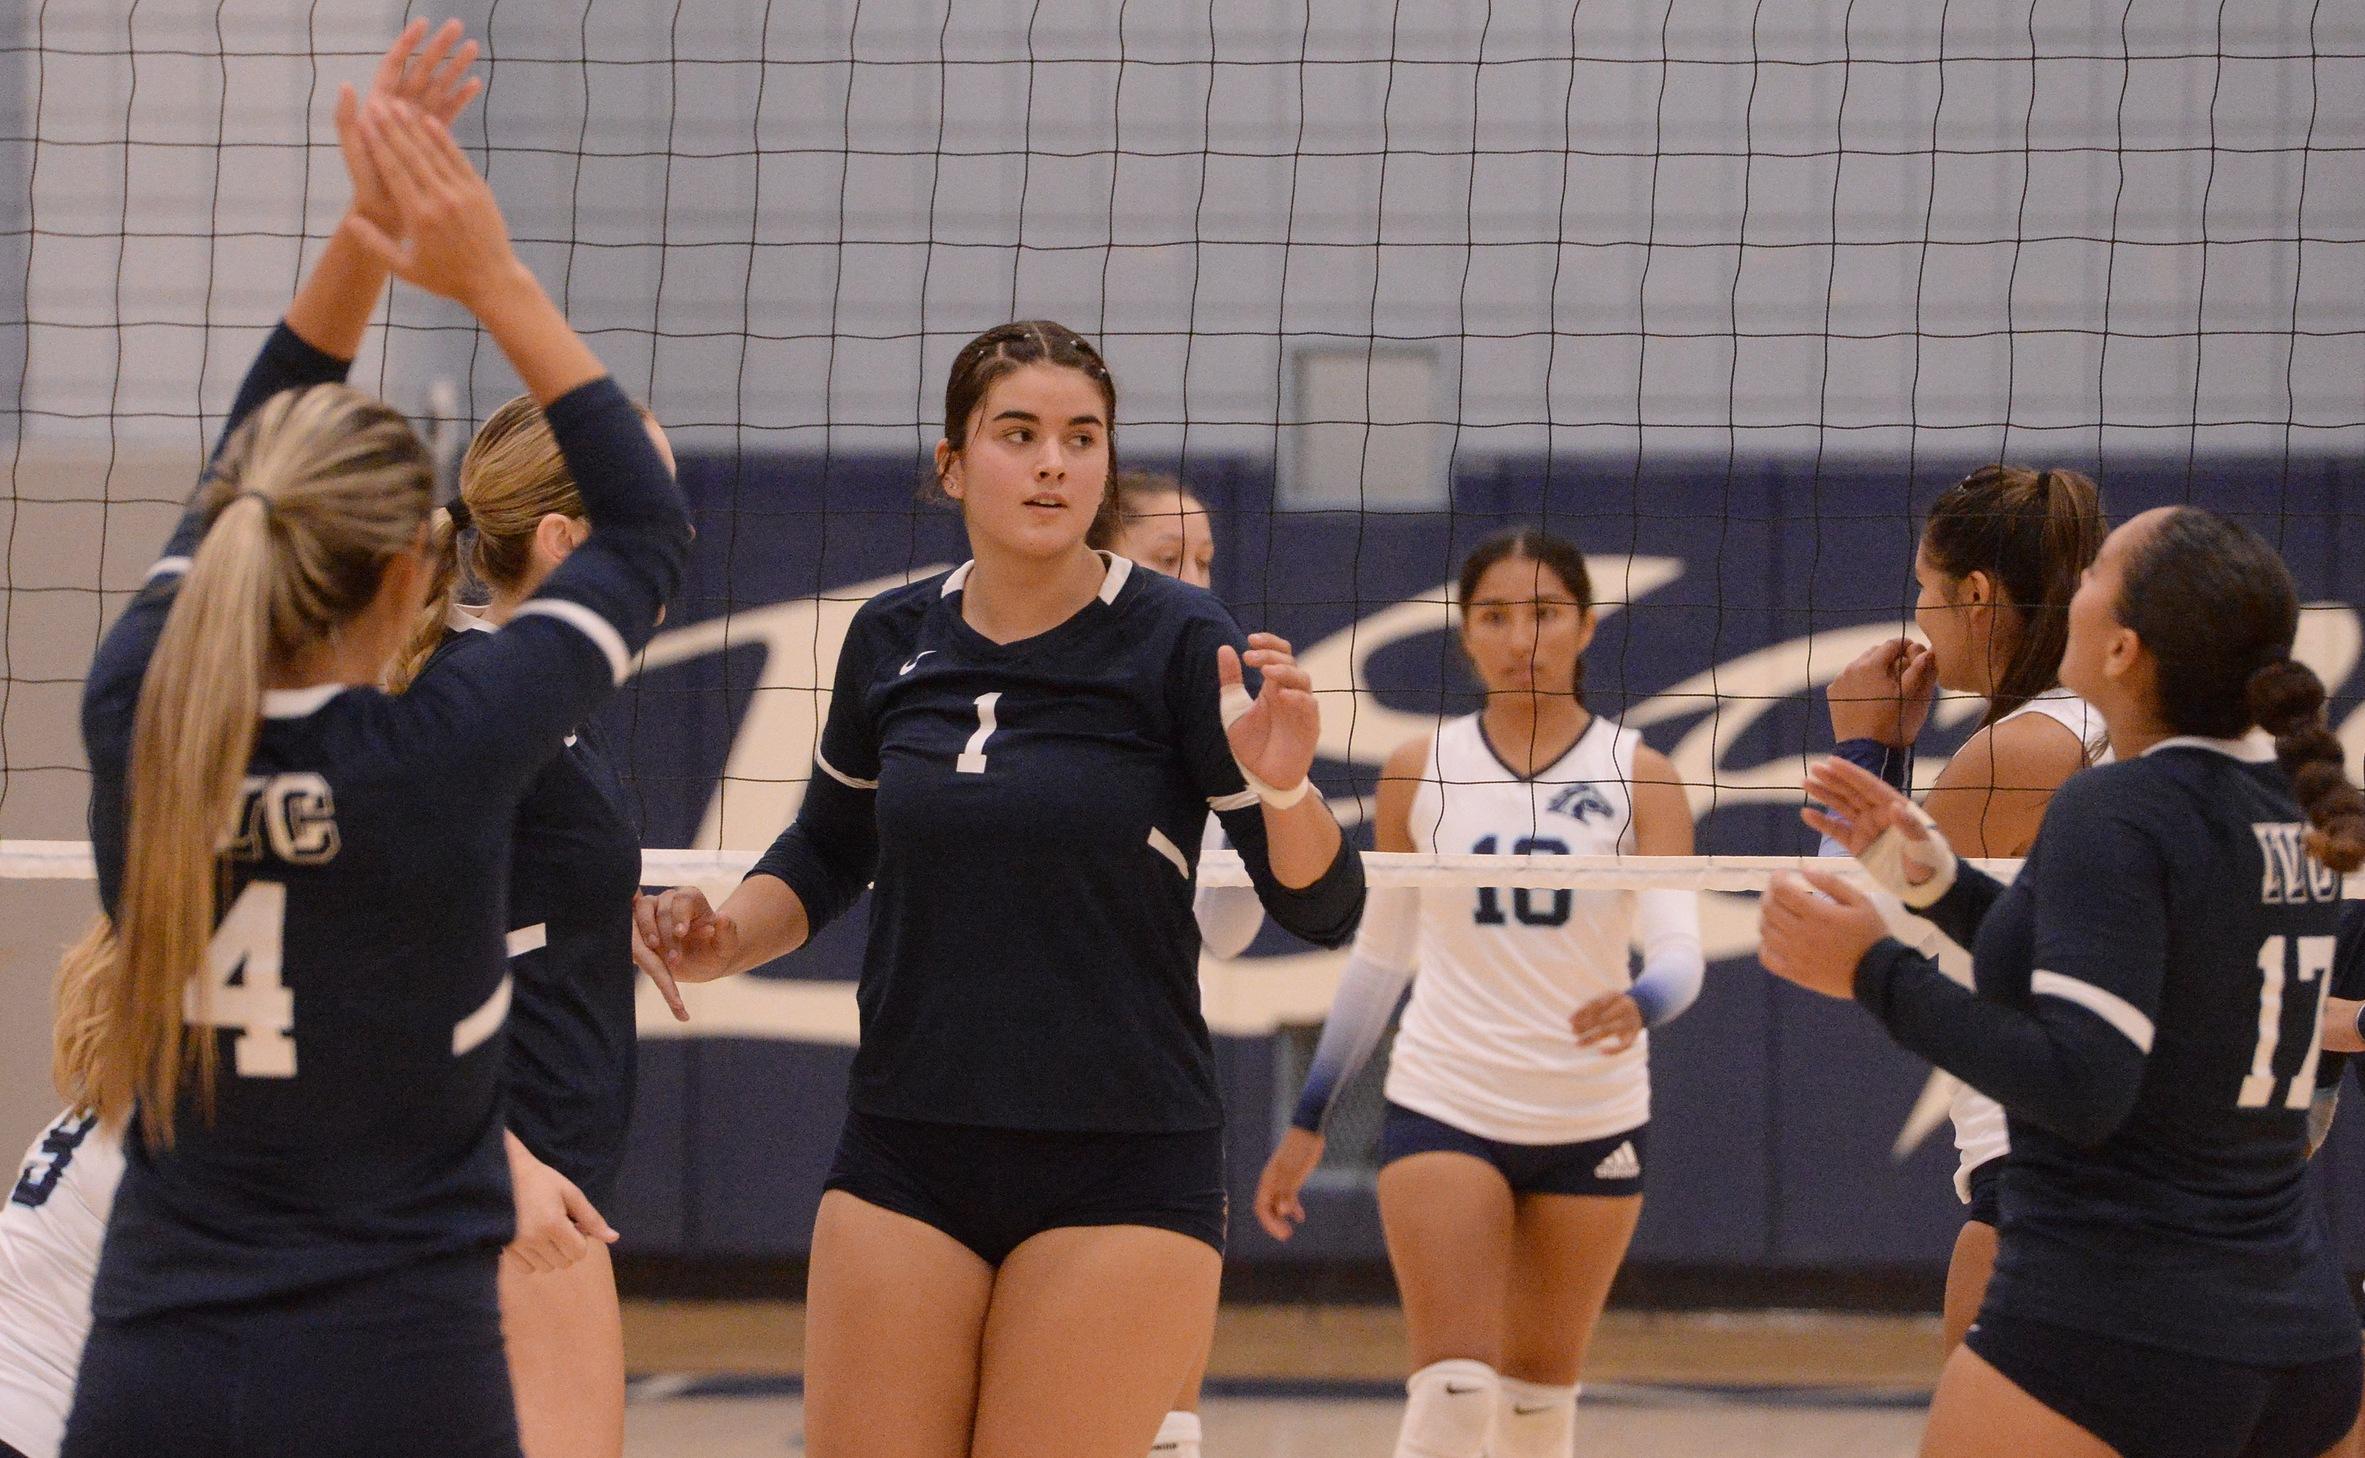 Volleyball team goes after fourth victory in a row Wednesday